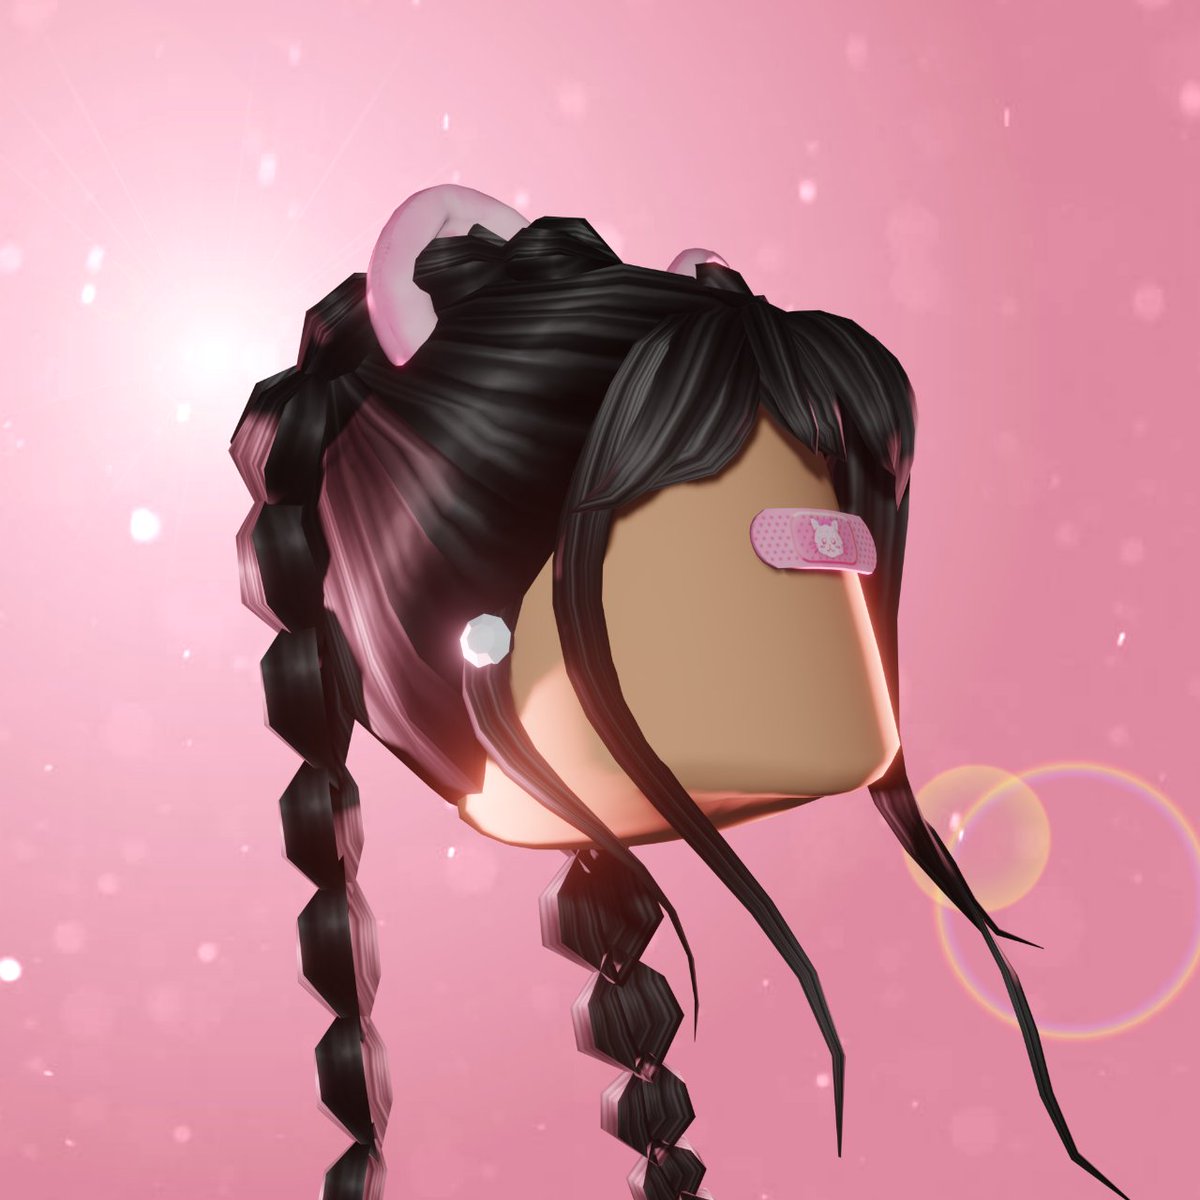 Fsi3n On Twitter A Head Profile Picture Gfx For Jennyb F Roblox Name Note For The Next 10 People Who Buy A Roblox Head Profile Picture Gfx Is 1 1 Pic Gift Dm Me - discord roblox profile pictures